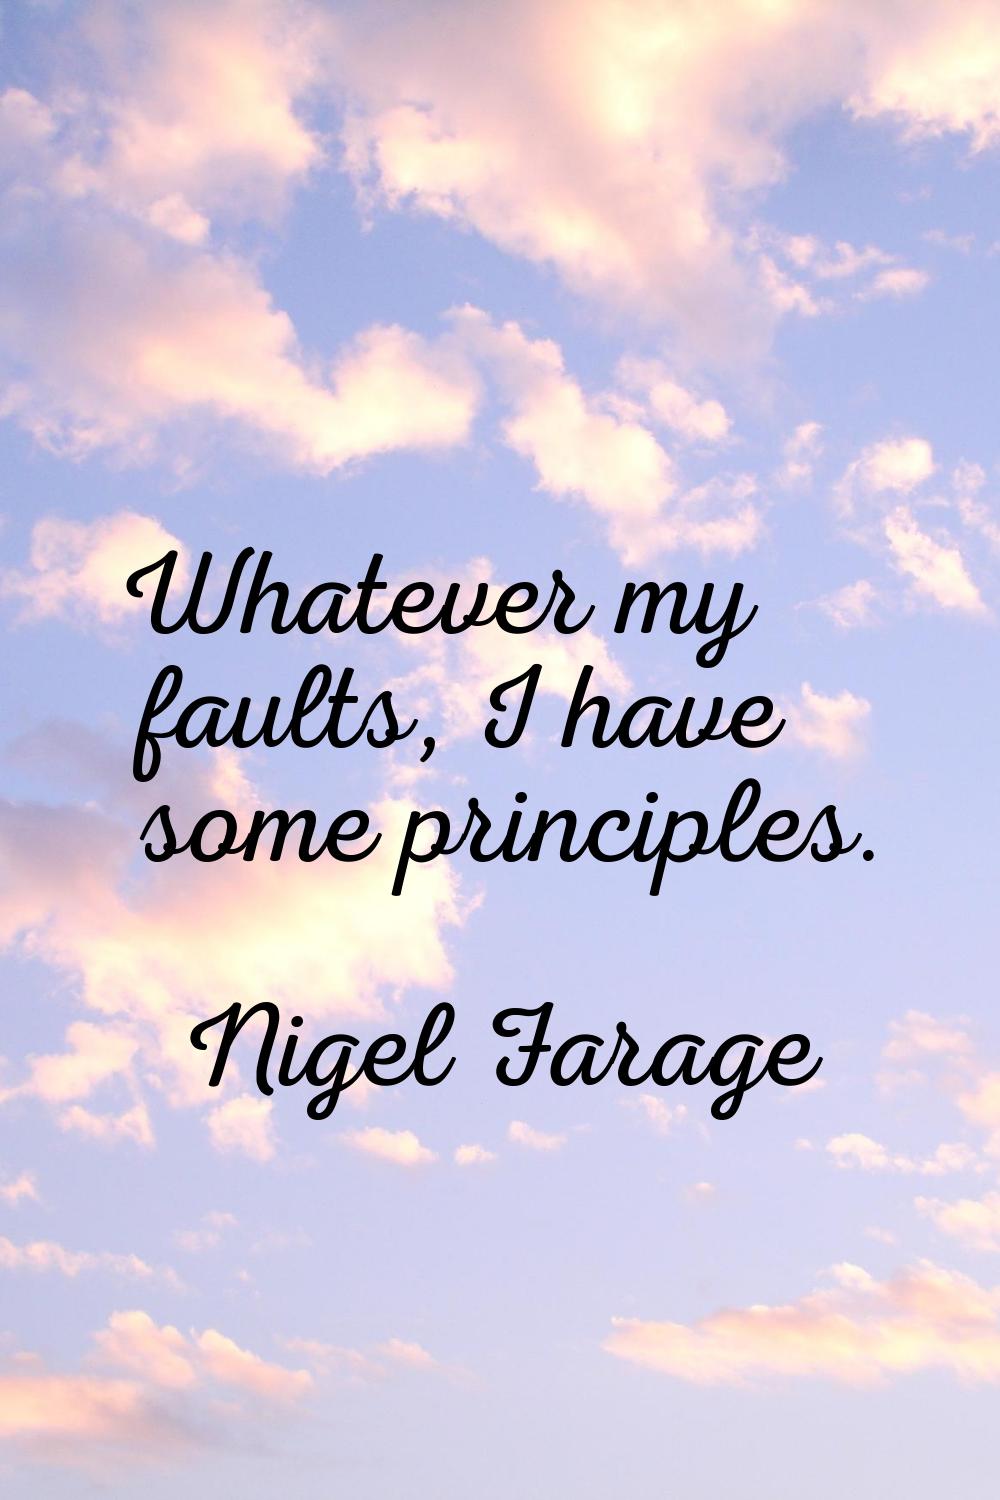 Whatever my faults, I have some principles.